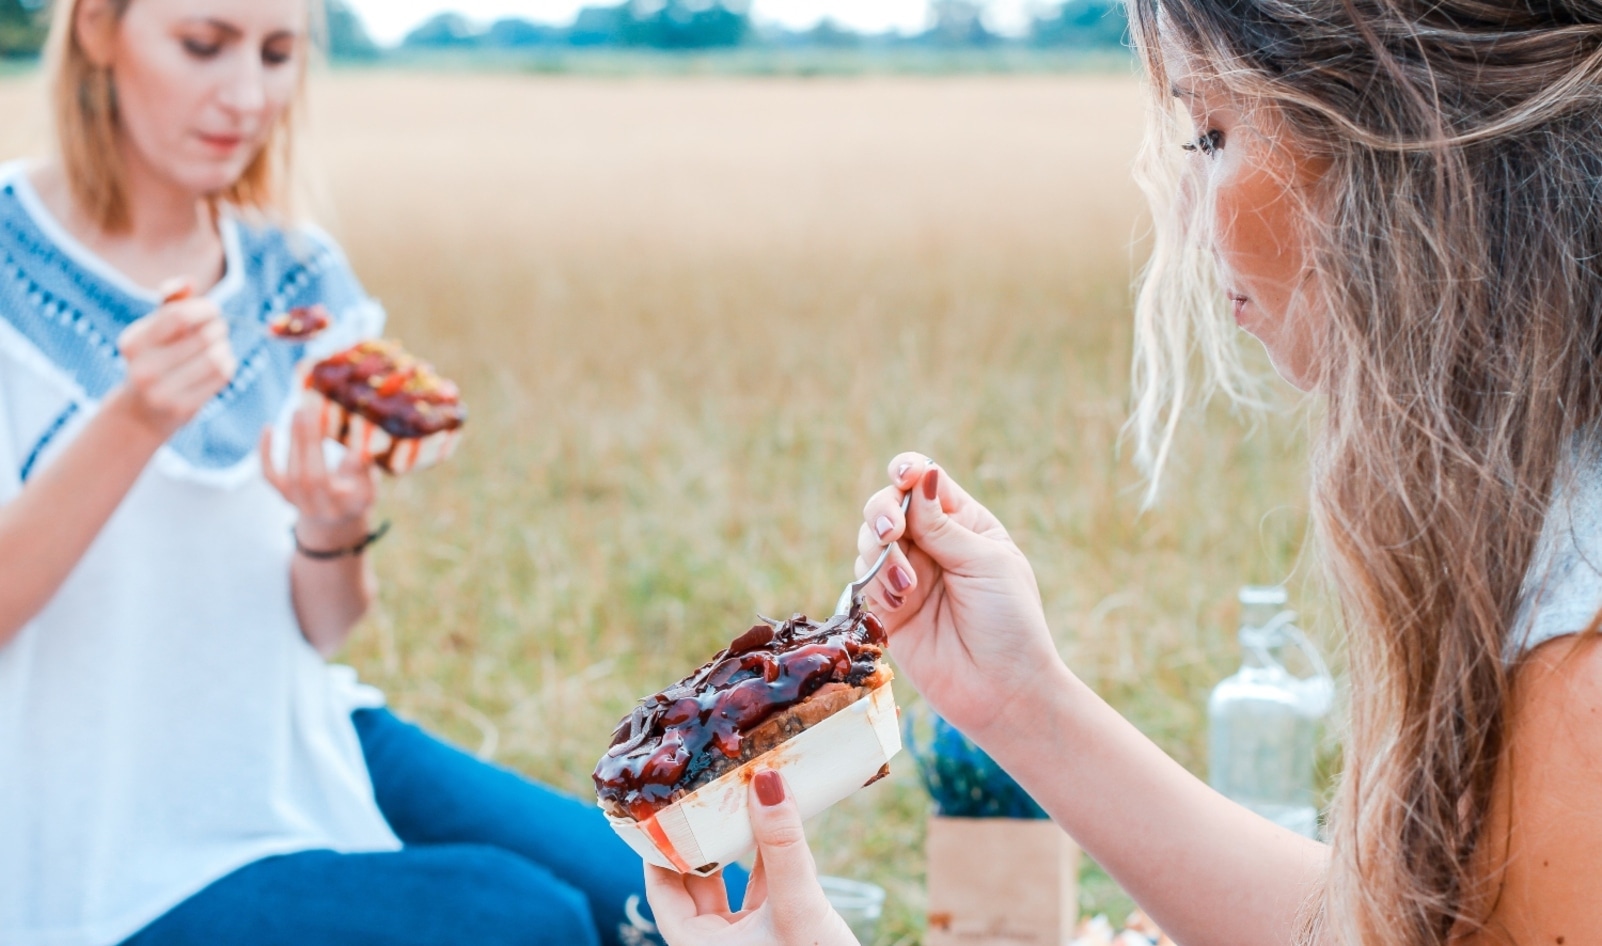 The 9 Best Vegan Foods for Your Next Picnic